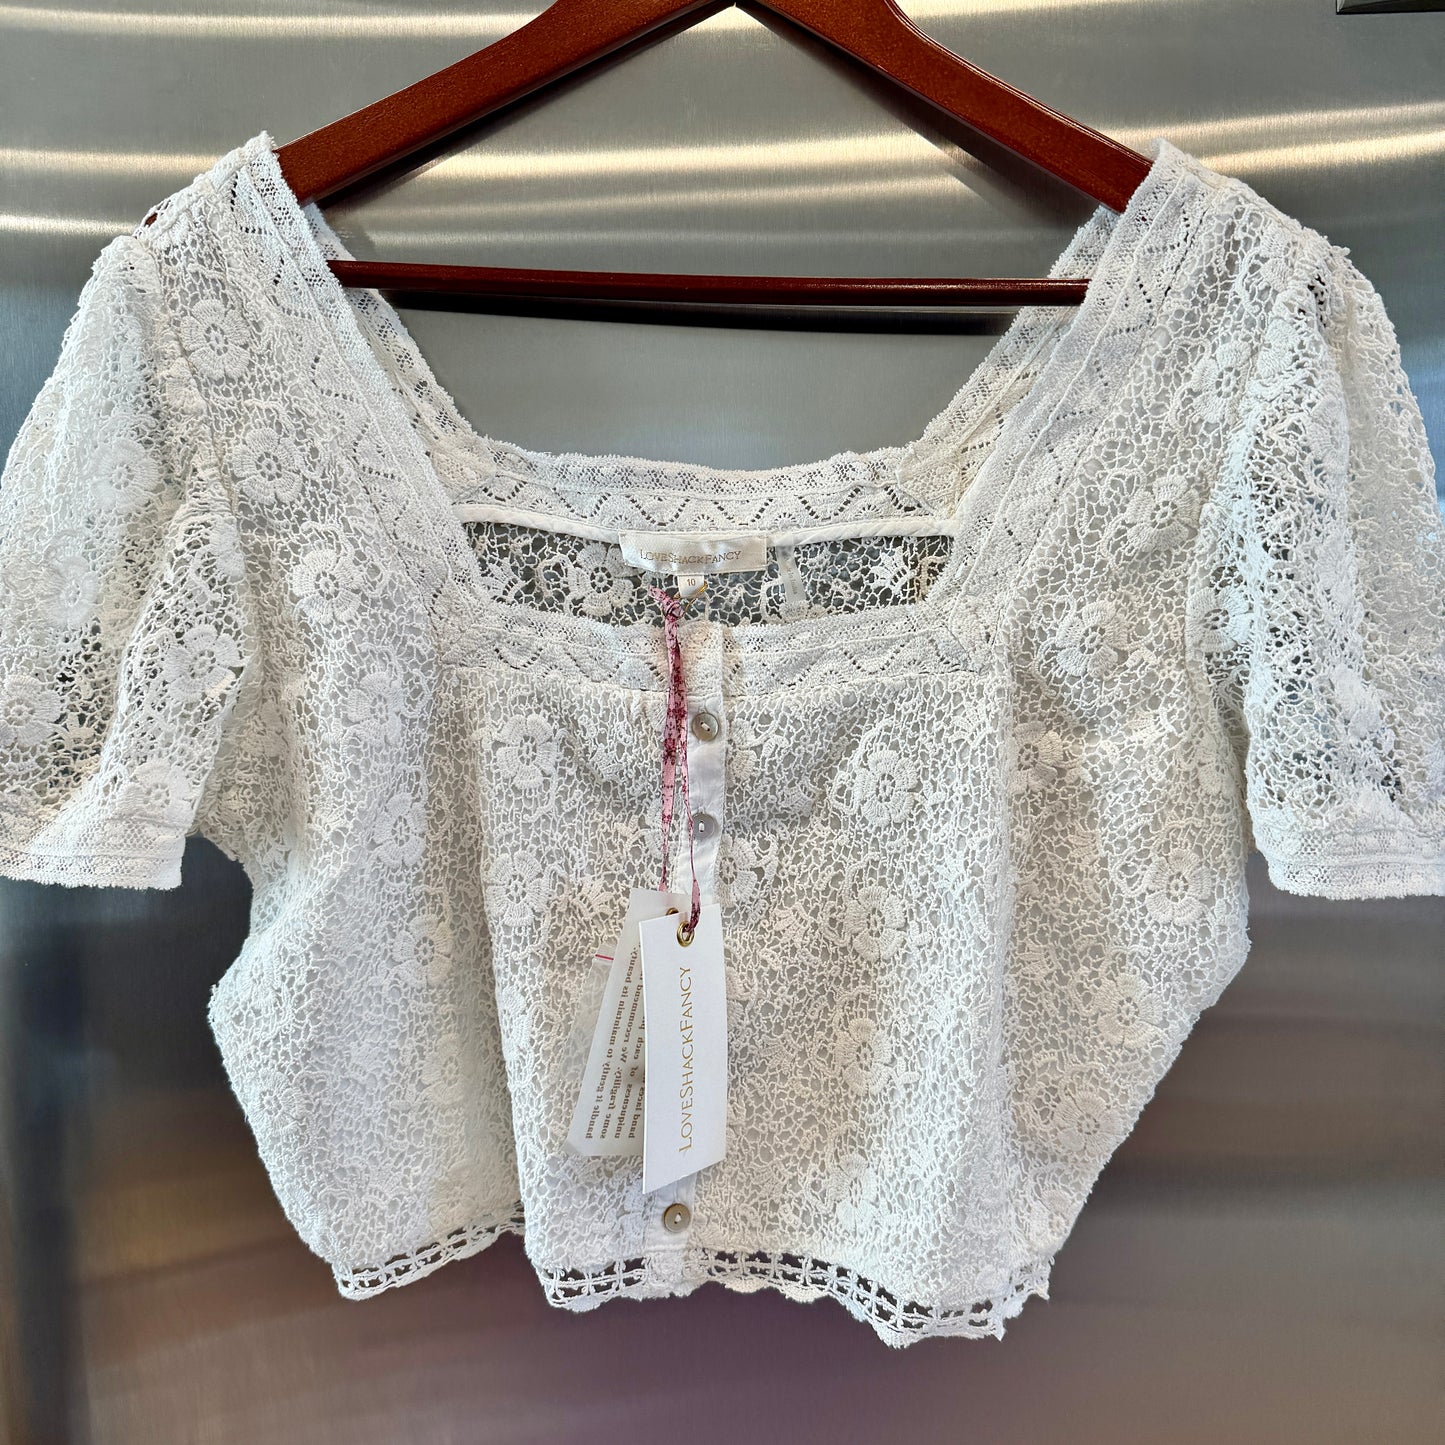 LoveShackFancy Carmeline Cropped Top in True white floral lace brand new